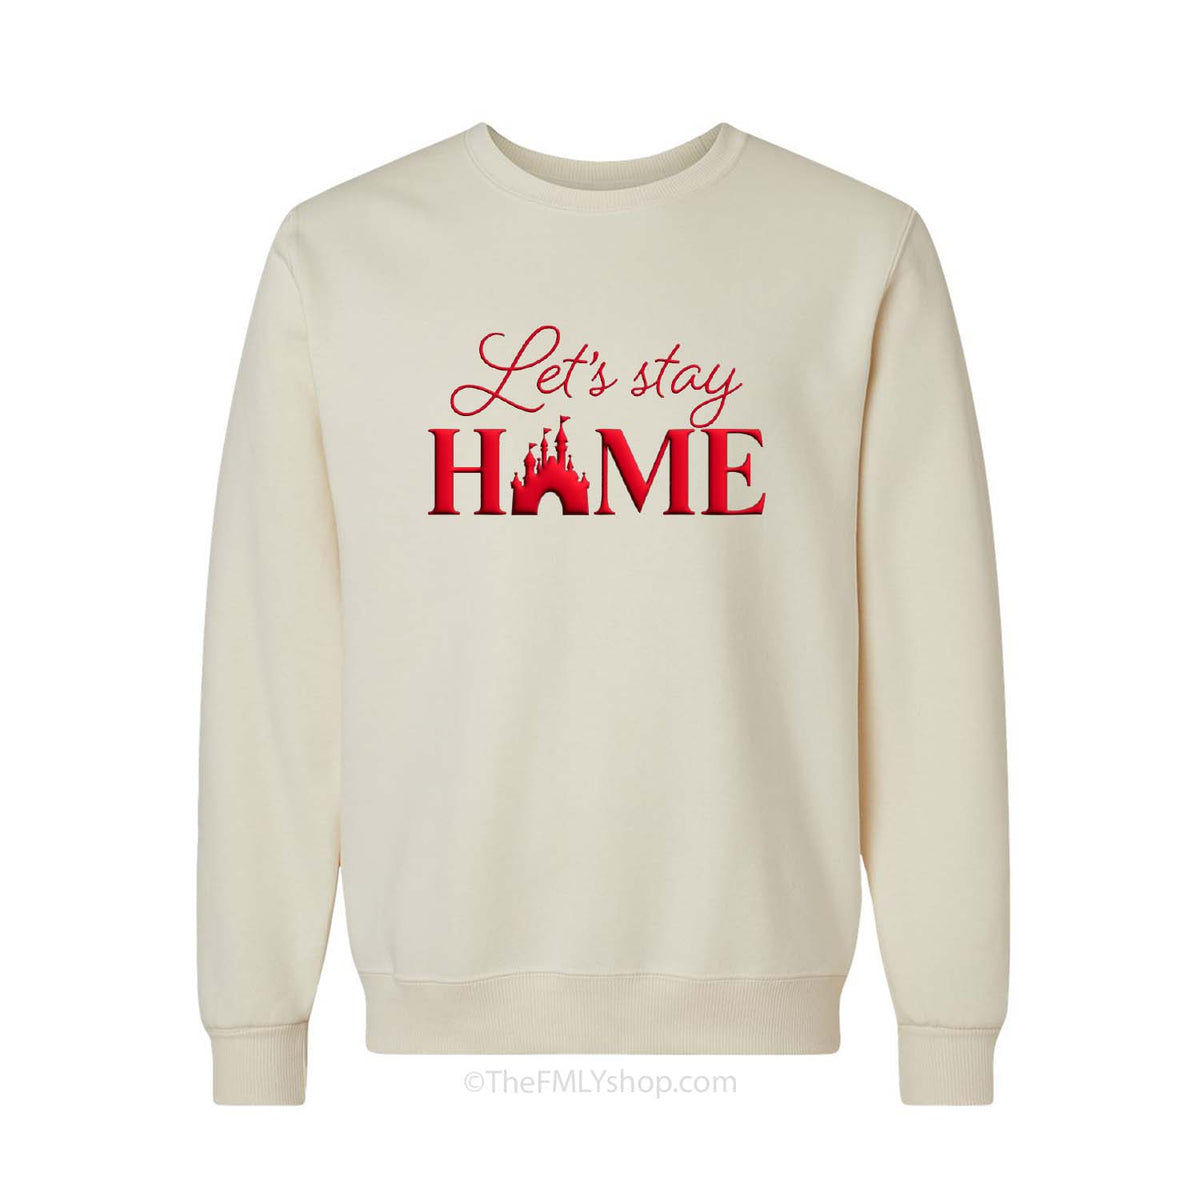 Let's Stay Home Puffed Sweatshirt